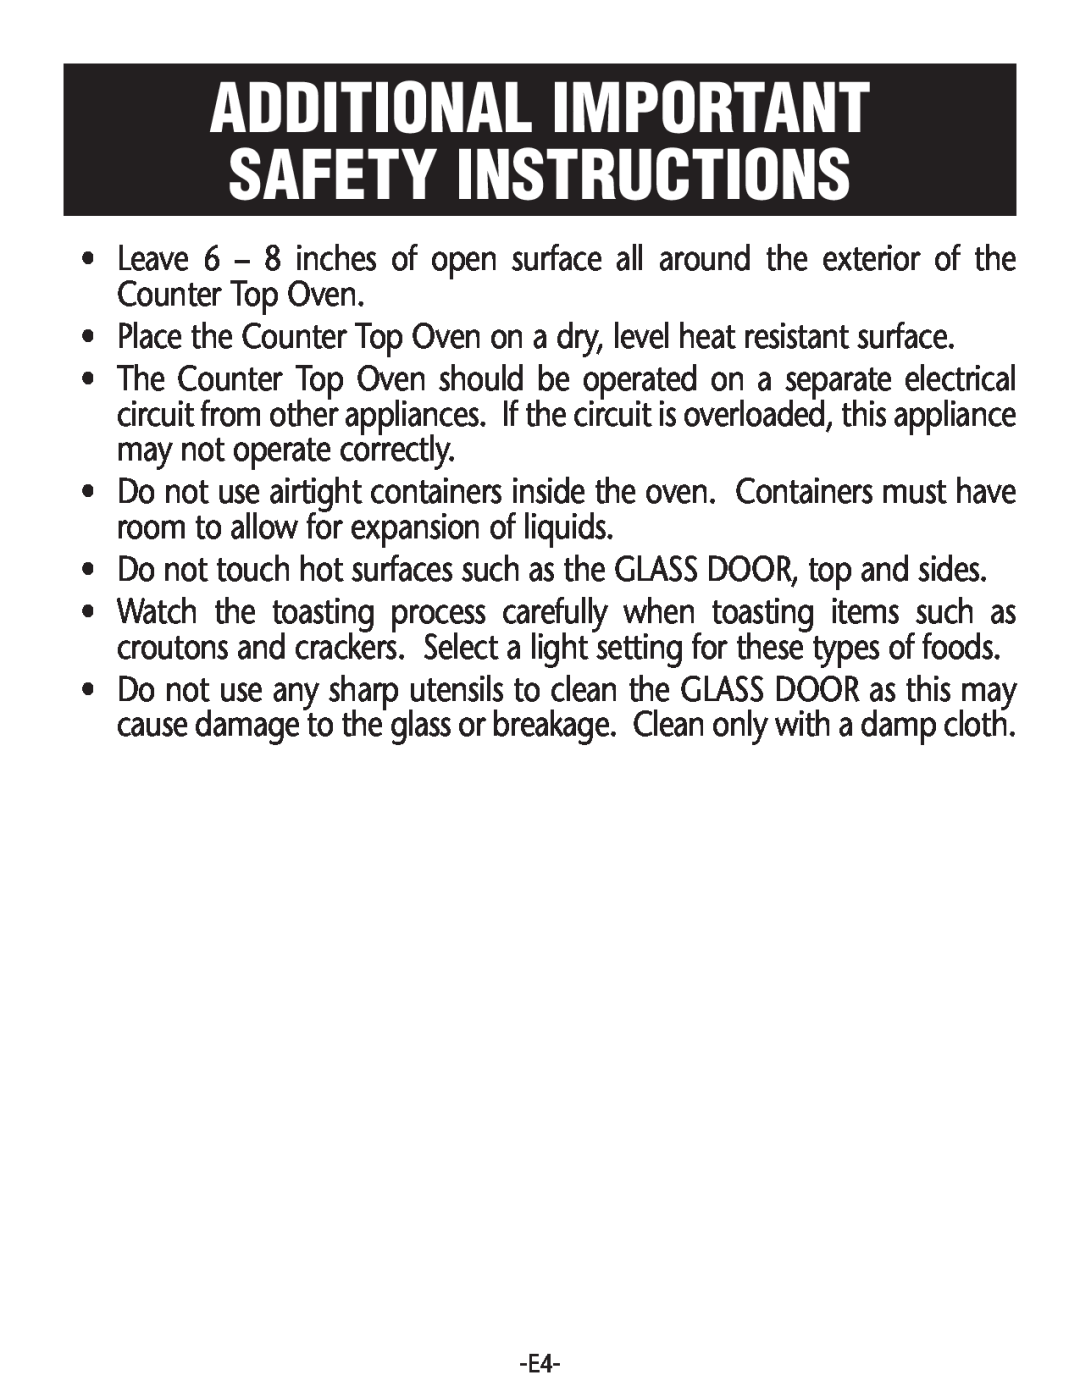 Rival CO602 Additional Important Safety Instructions, Place the Counter Top Oven on a dry, level heat resistantsurface 